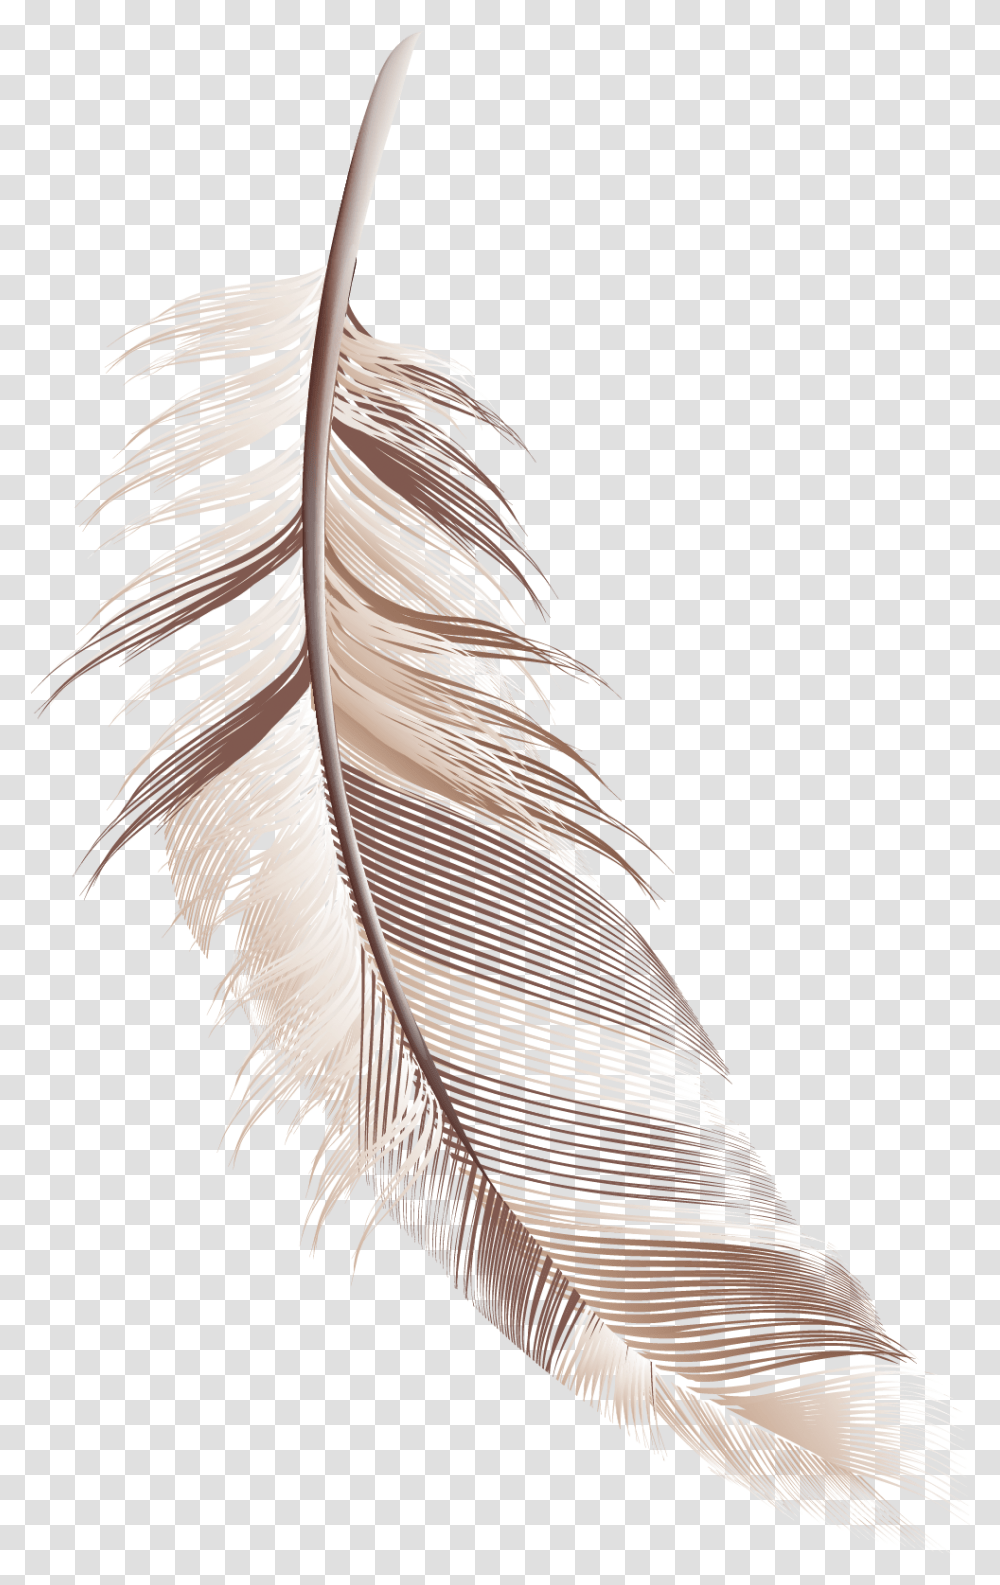 Cartoon Feather Material Download Background Feather Cartoon, Bird, Pattern, Ornament, Outdoors Transparent Png